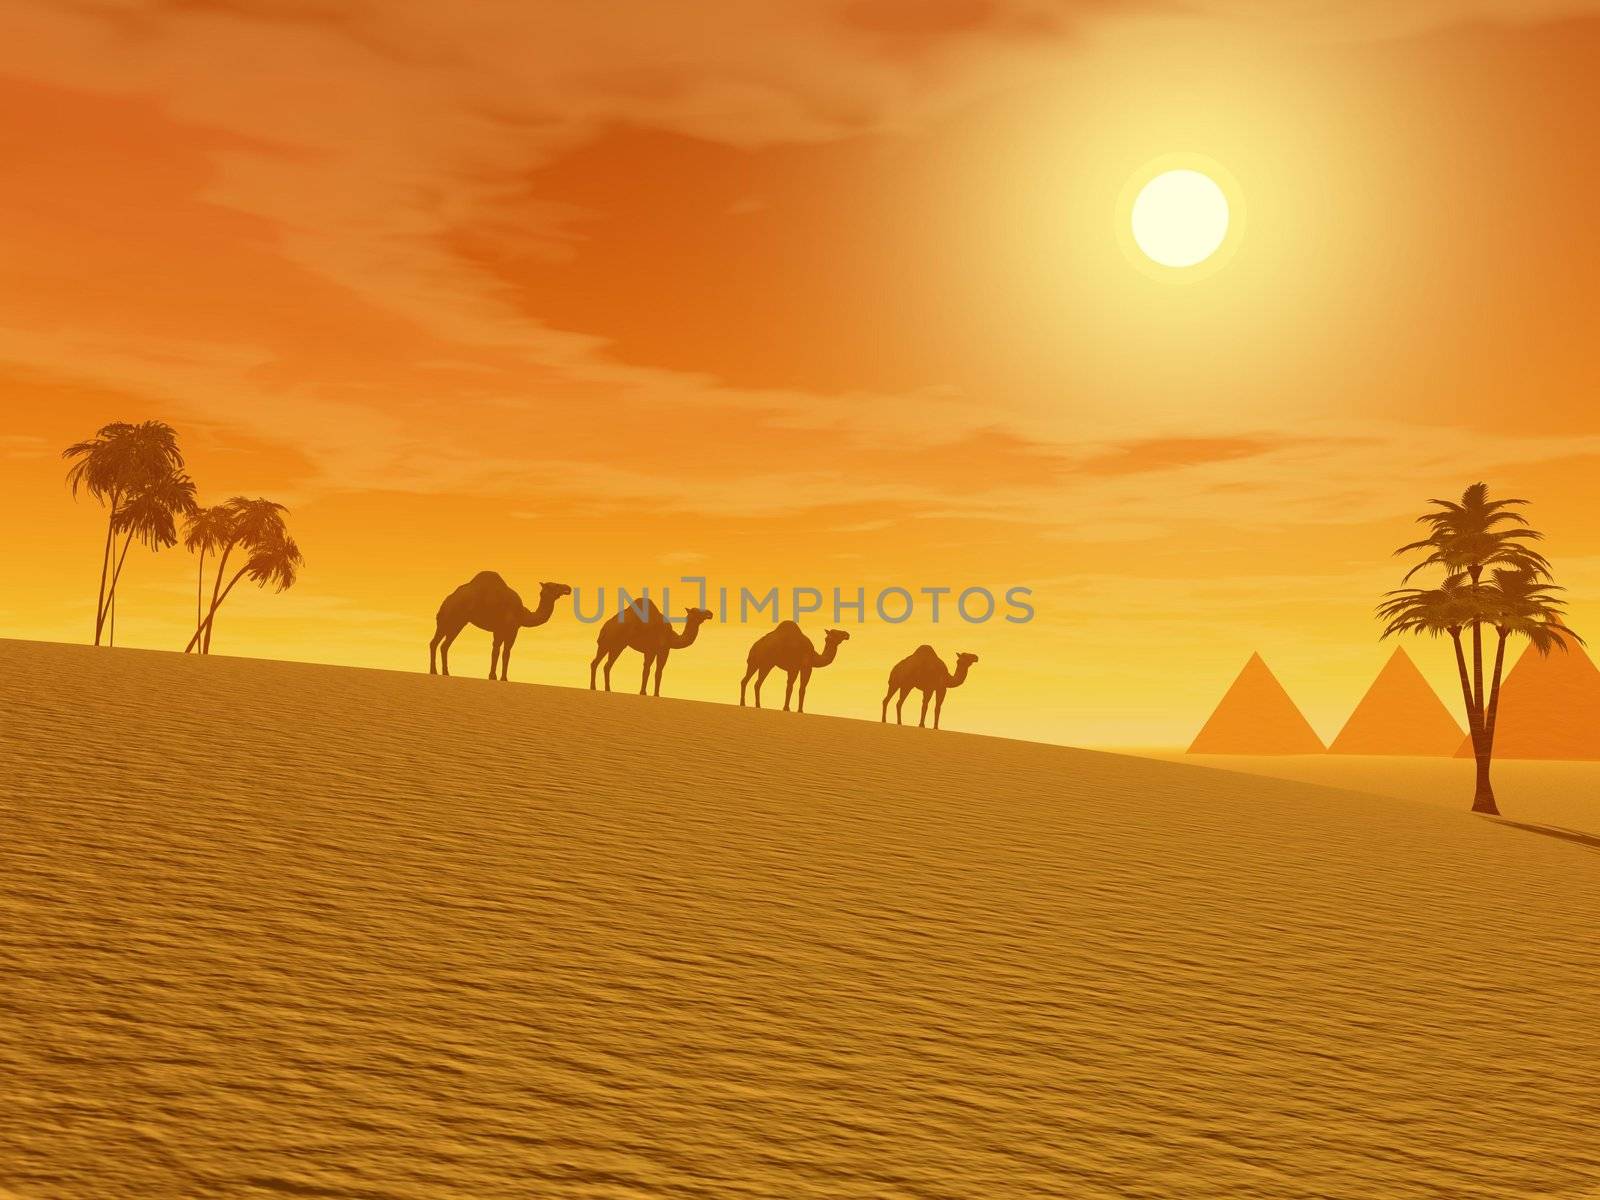 Camels walking in the desert between palmtrees and towards pyramids by sunset